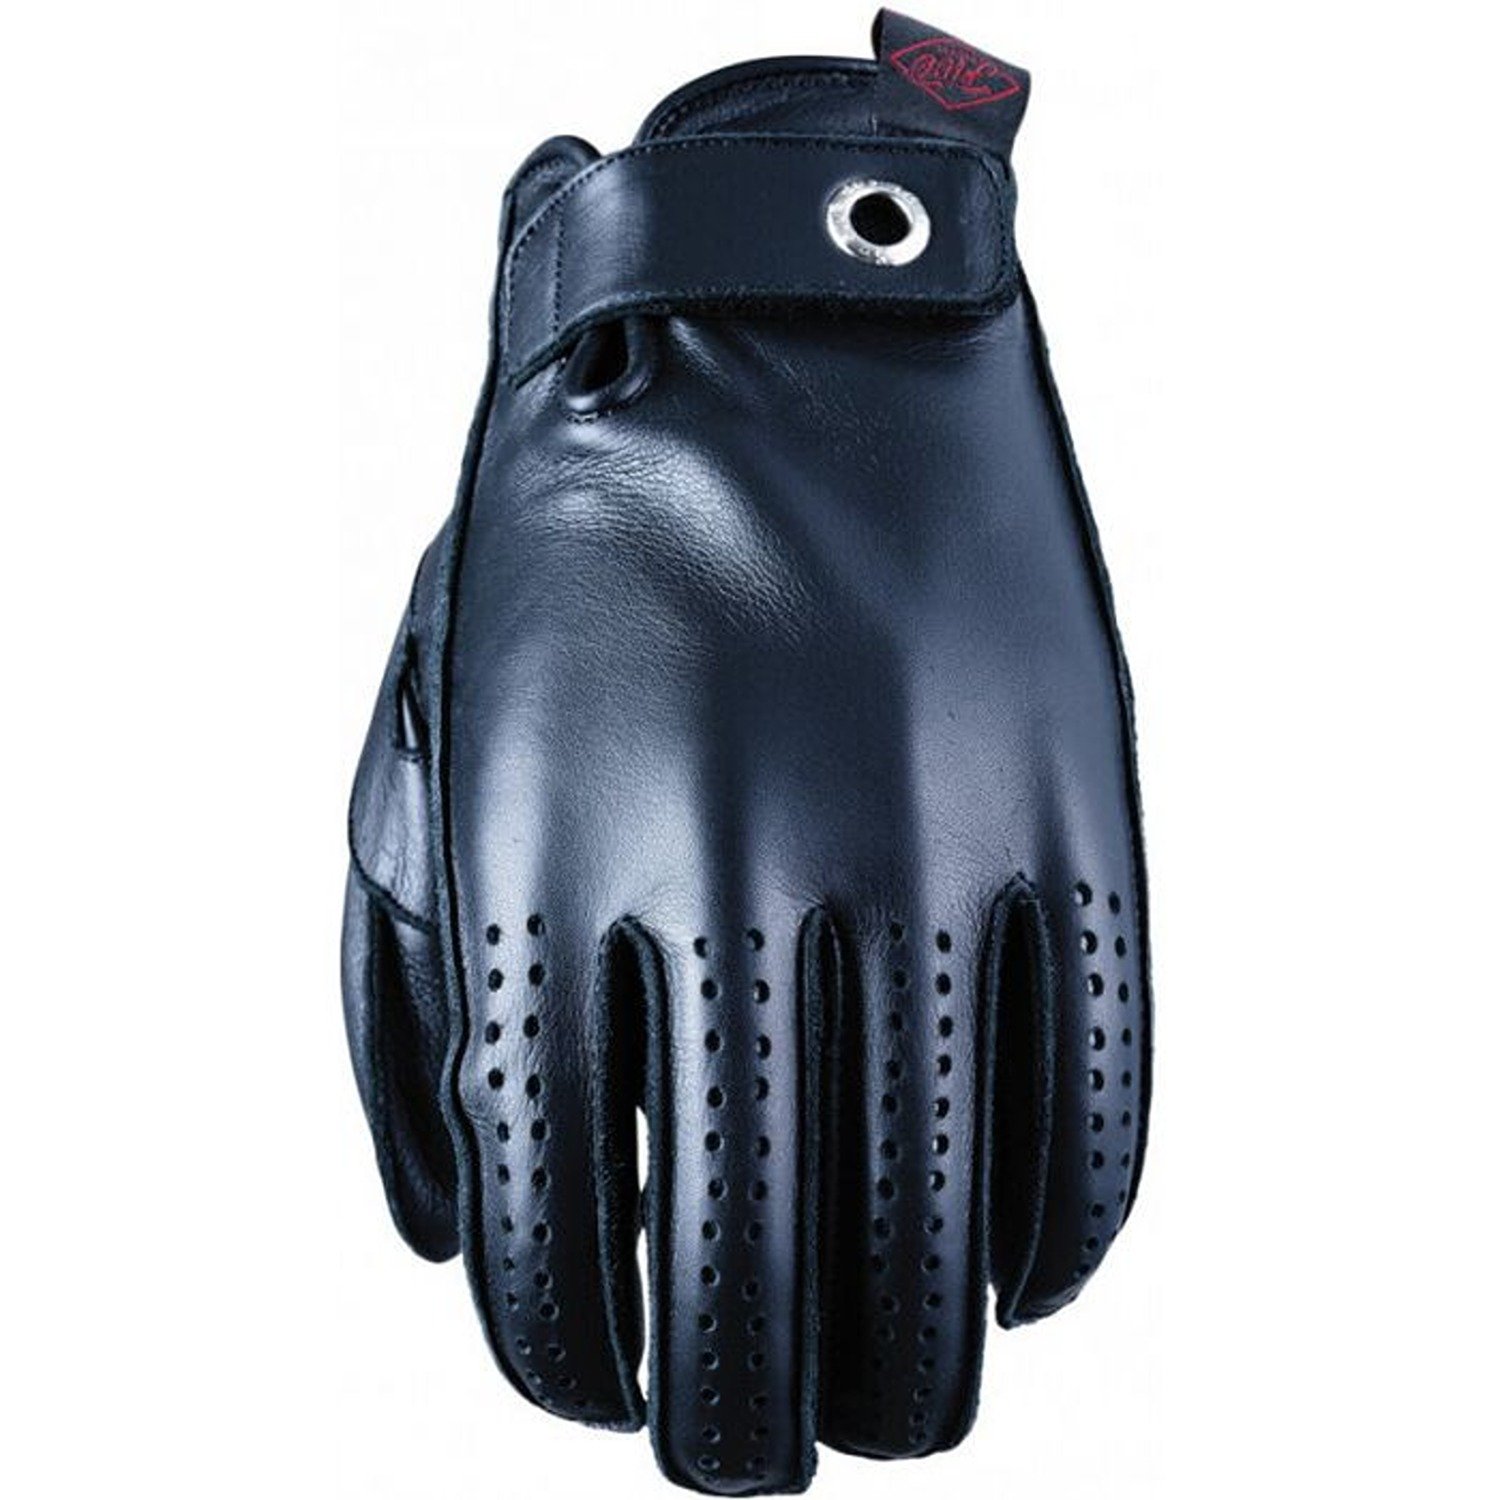 Image of Five Colorado Gloves Black Size 2XL ID 4770916487313